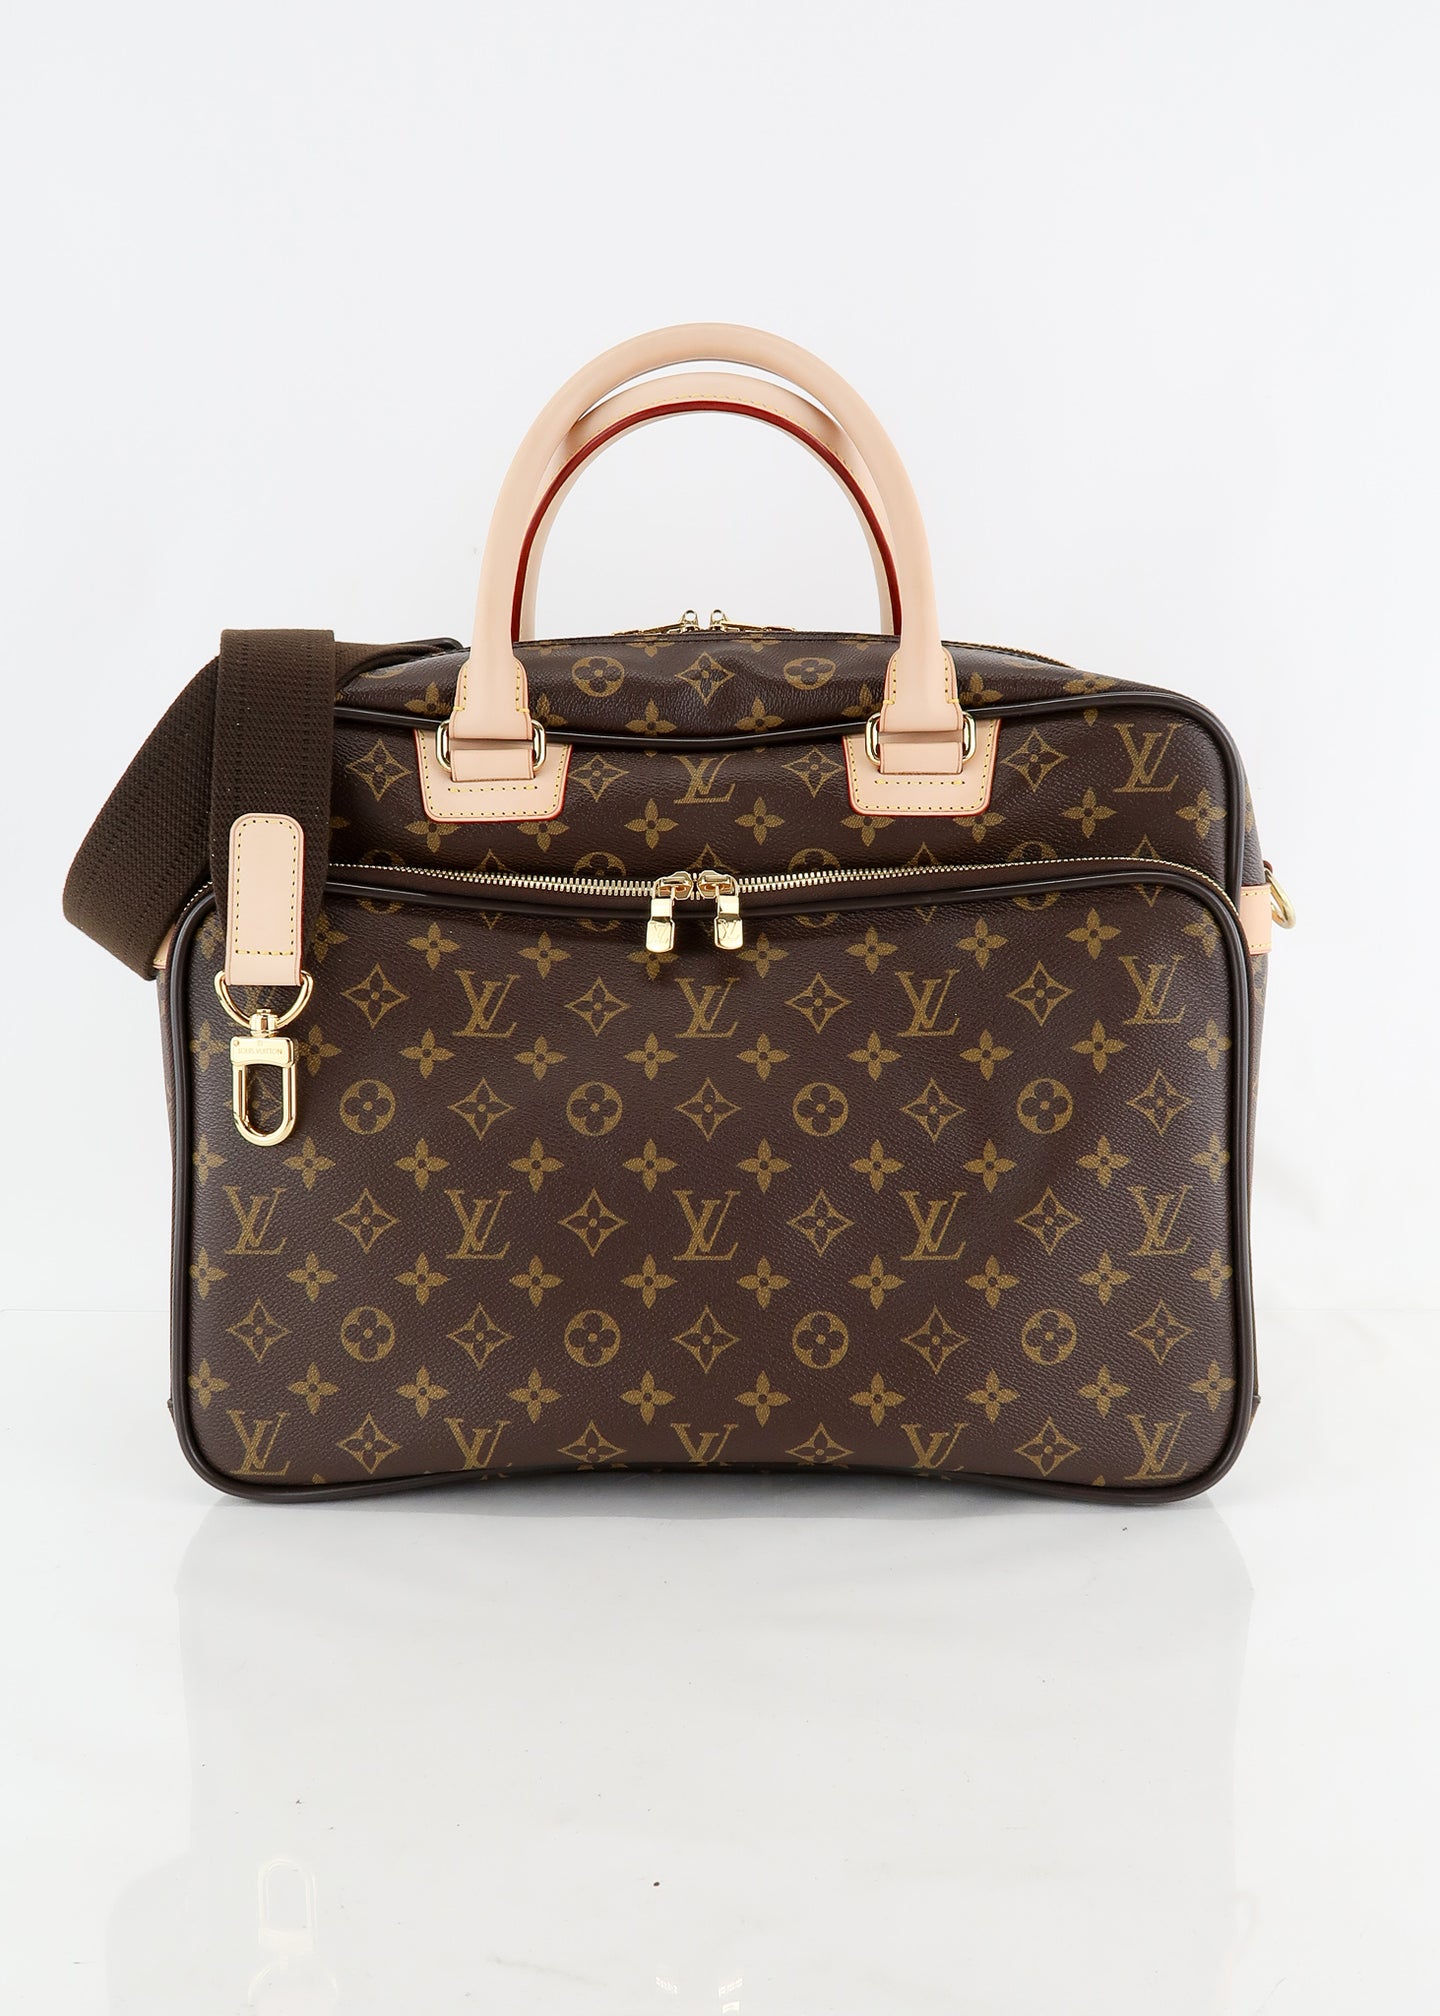 Louis Vuitton Icare - in brown or black?